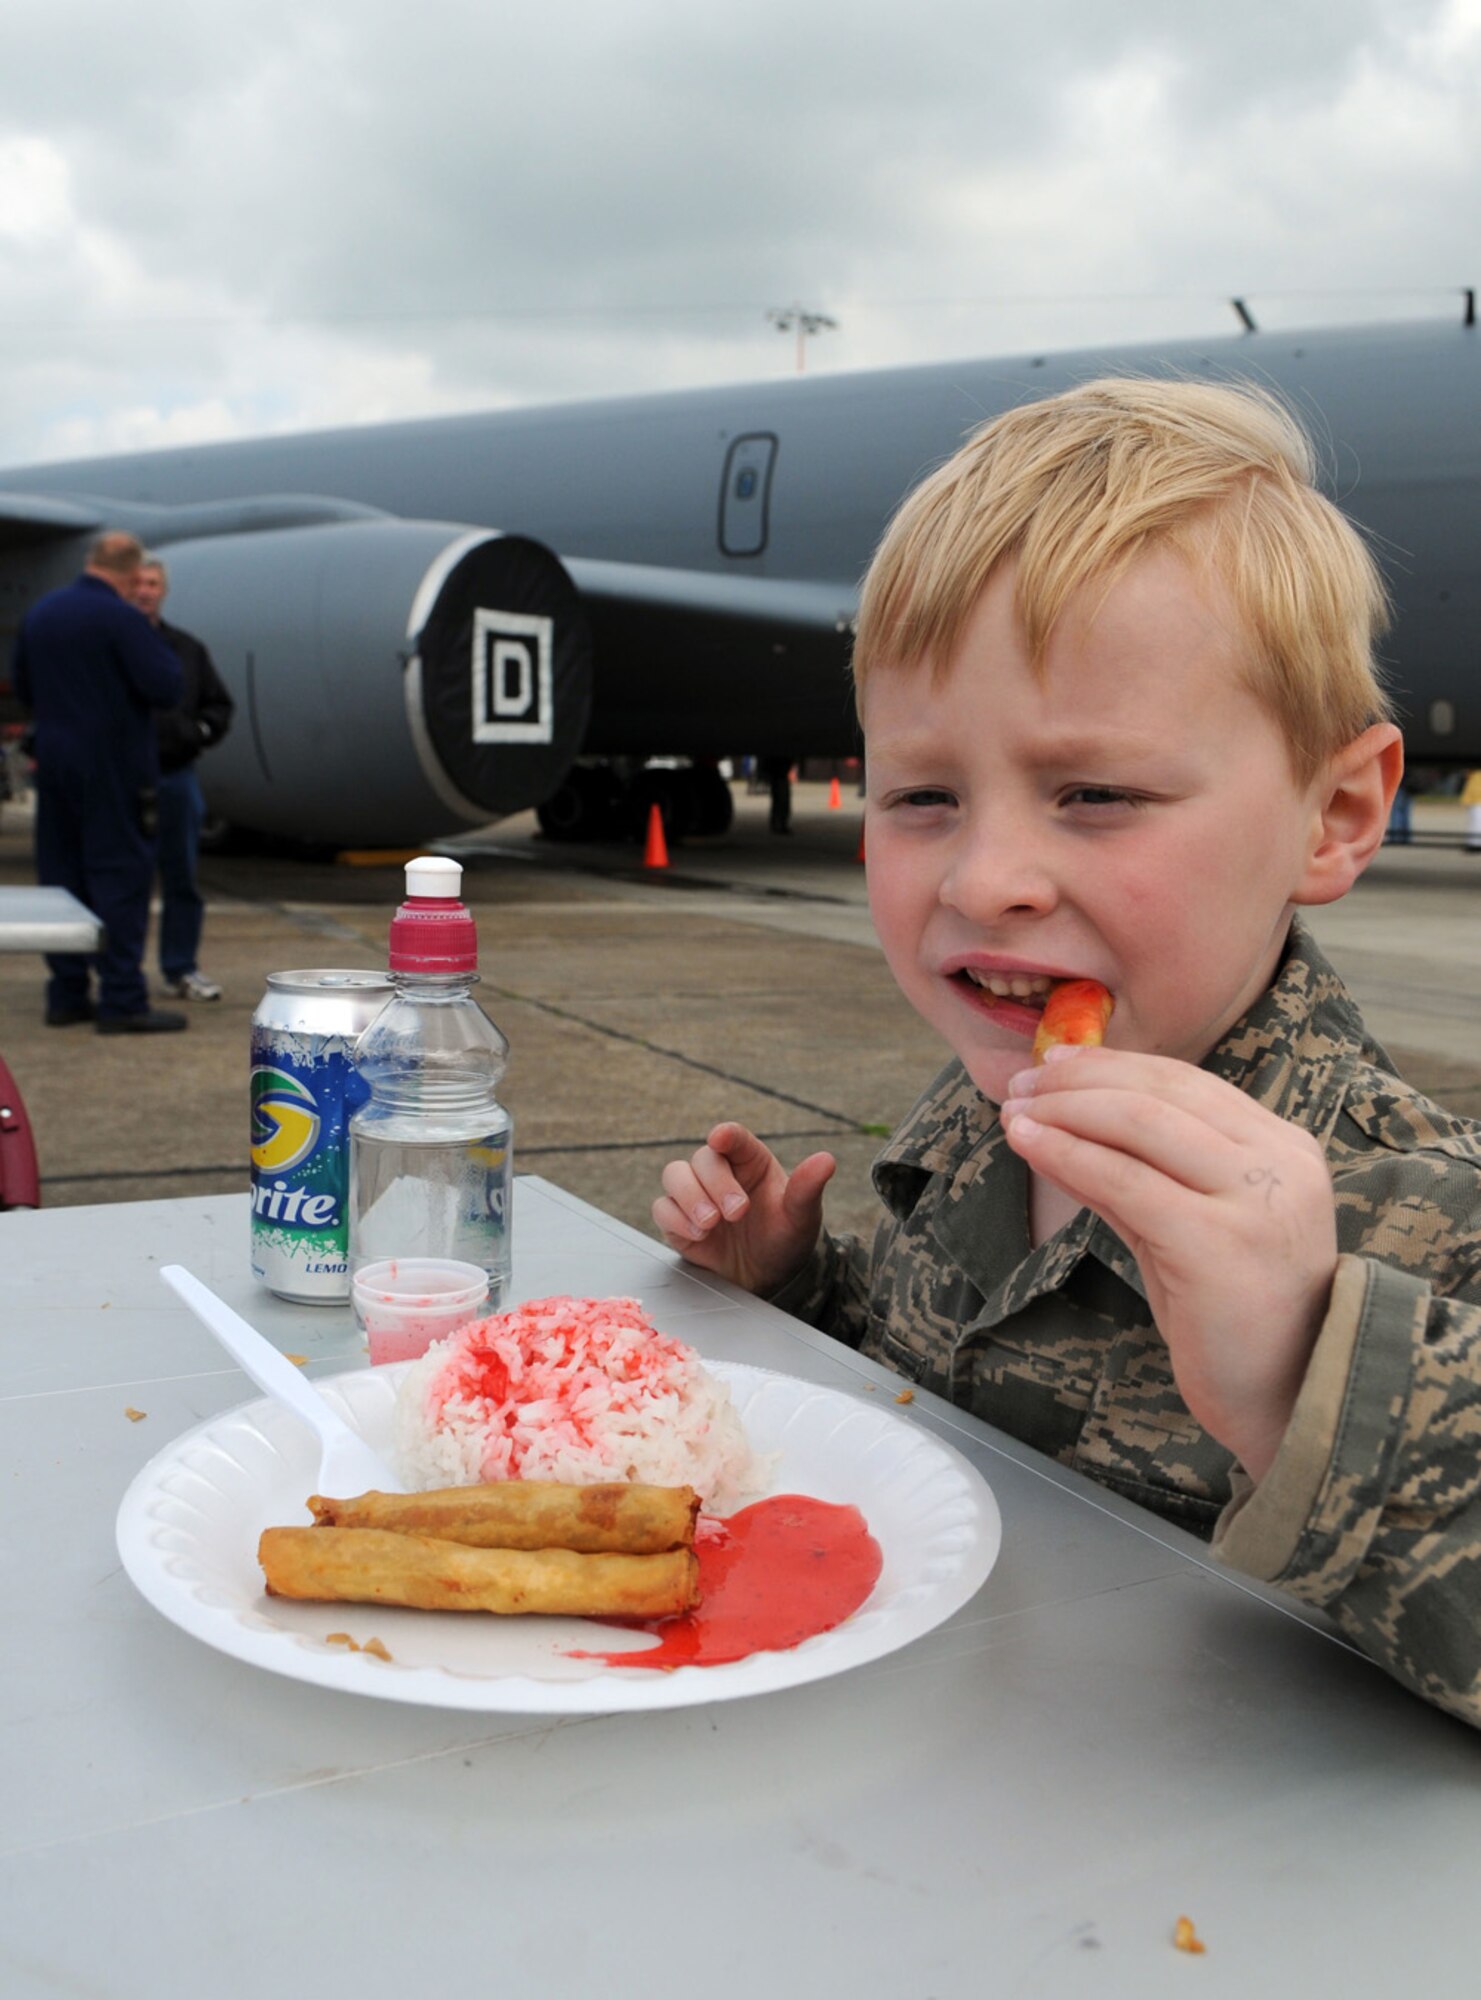 Noah Ogle, 6, son of Senior Master Sgt. William Ogle and his wife, Kim, enjoys lunch in front of a 100th Air Refueling Wing KC-135 during RAF Mildenhall’s 75th Anniversary celebration May 15.  (U.S. Air Force photo by Staff Sgt. Austin M. May)